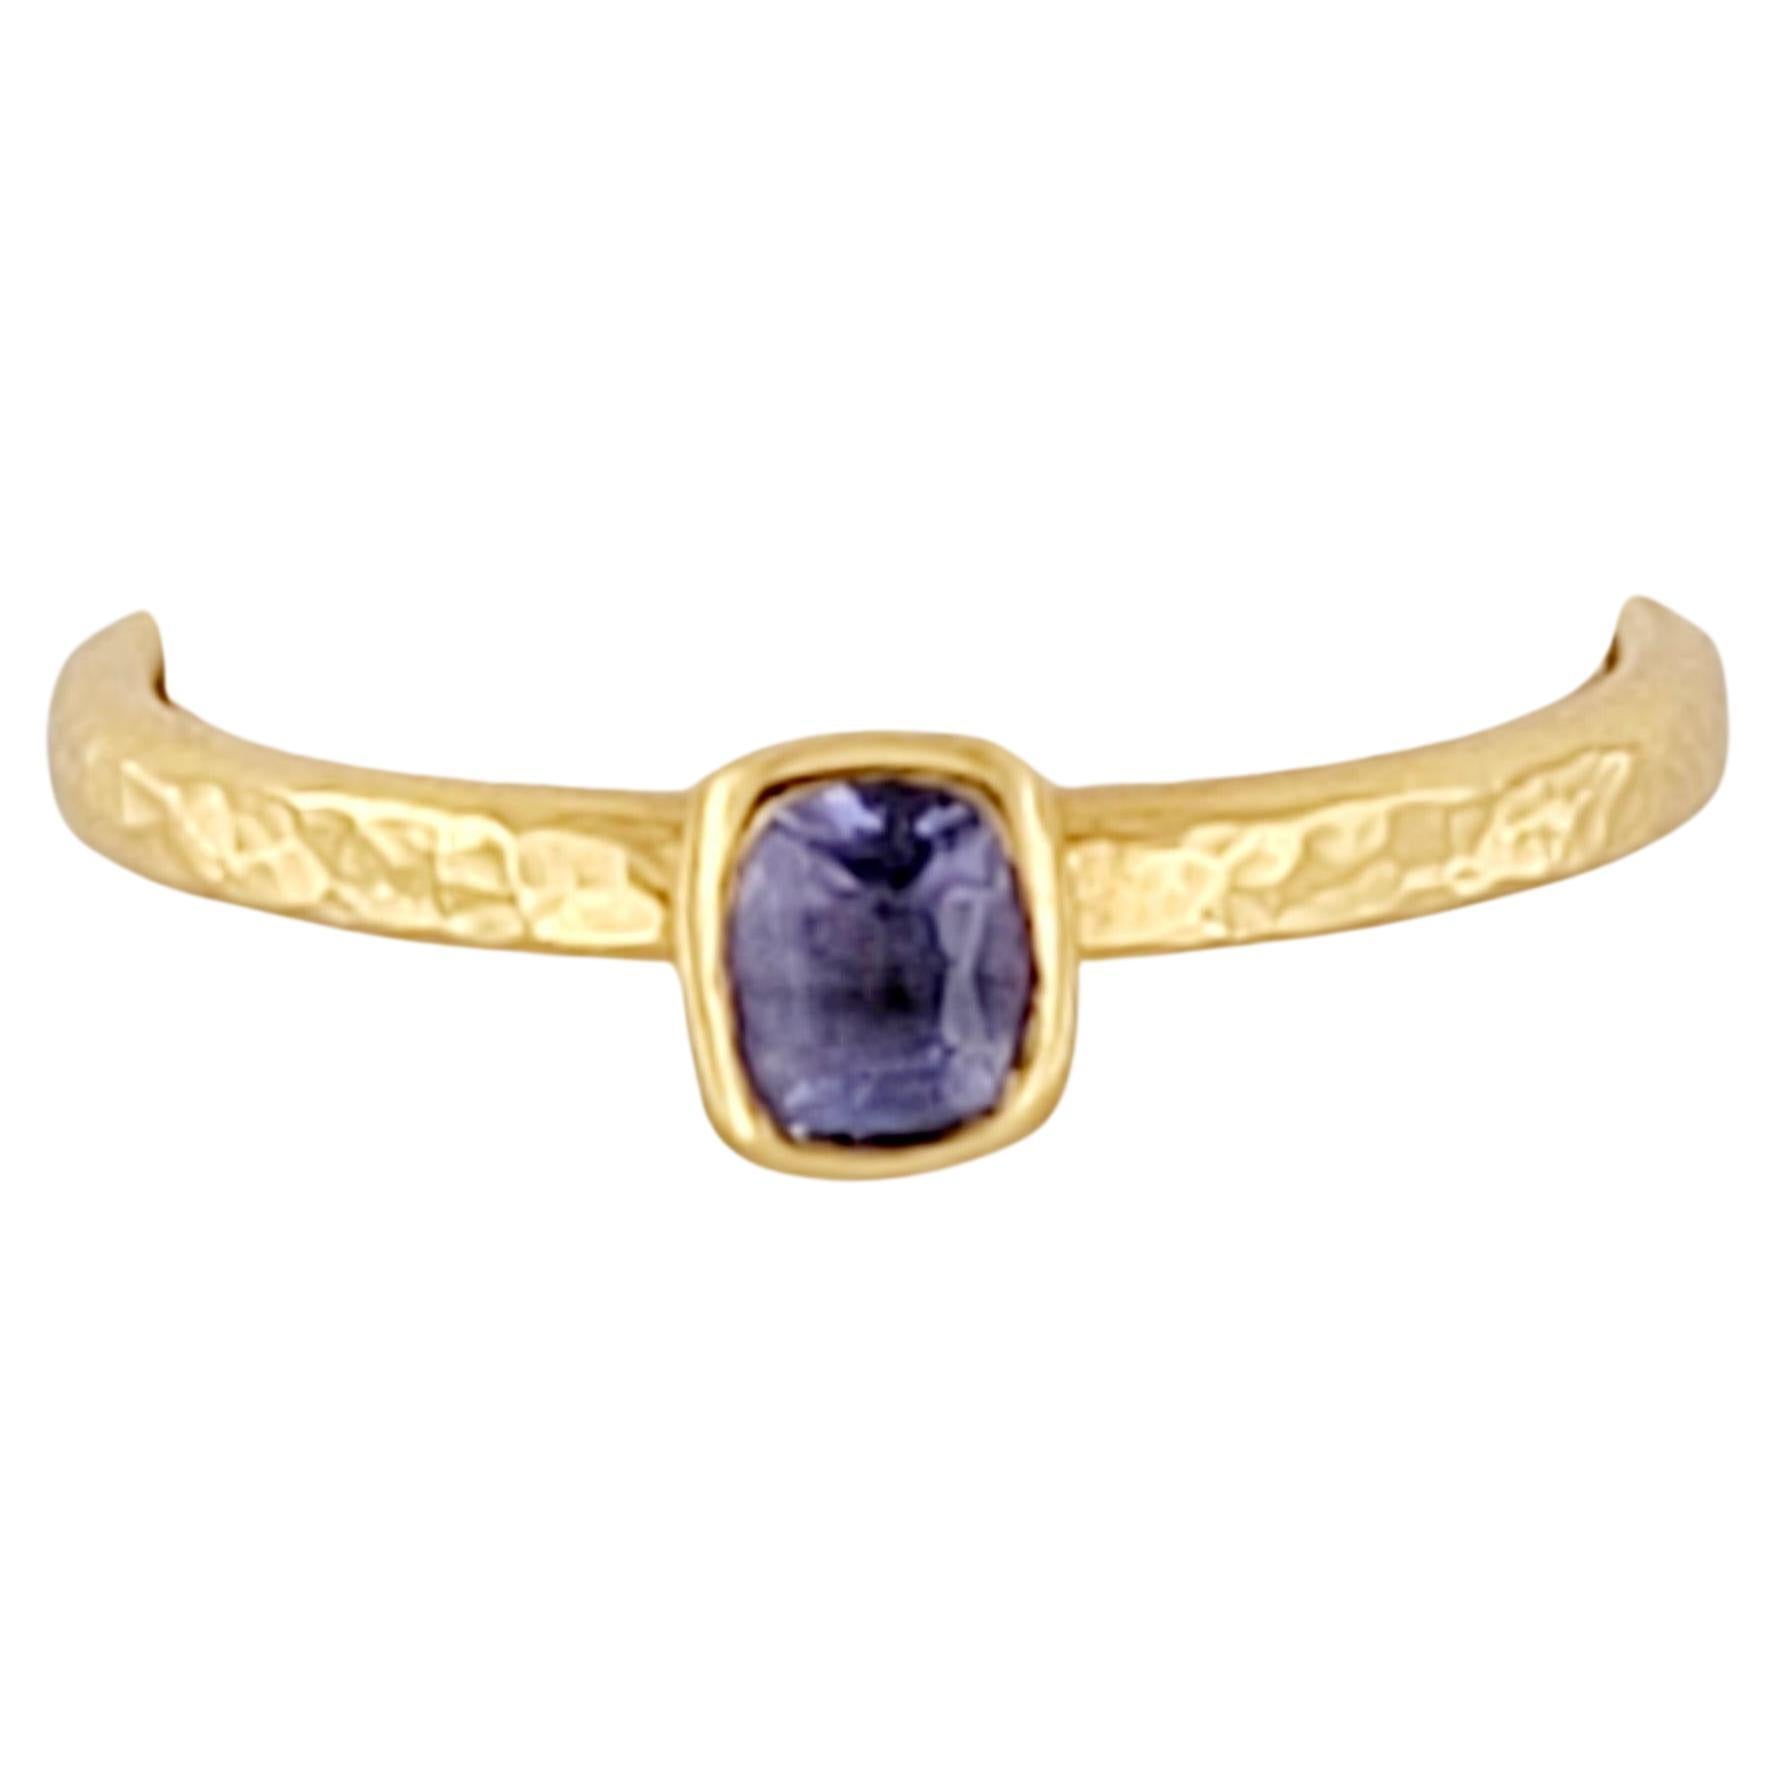 The Ring is Designed by a famous Turkish Designer Gurhan. The Ring is set in 22K Yellow Gold with a beautiful Tanzanite Gemstone. It weights 3.00 grams. Set in Size 6.5. Used, in great condition.